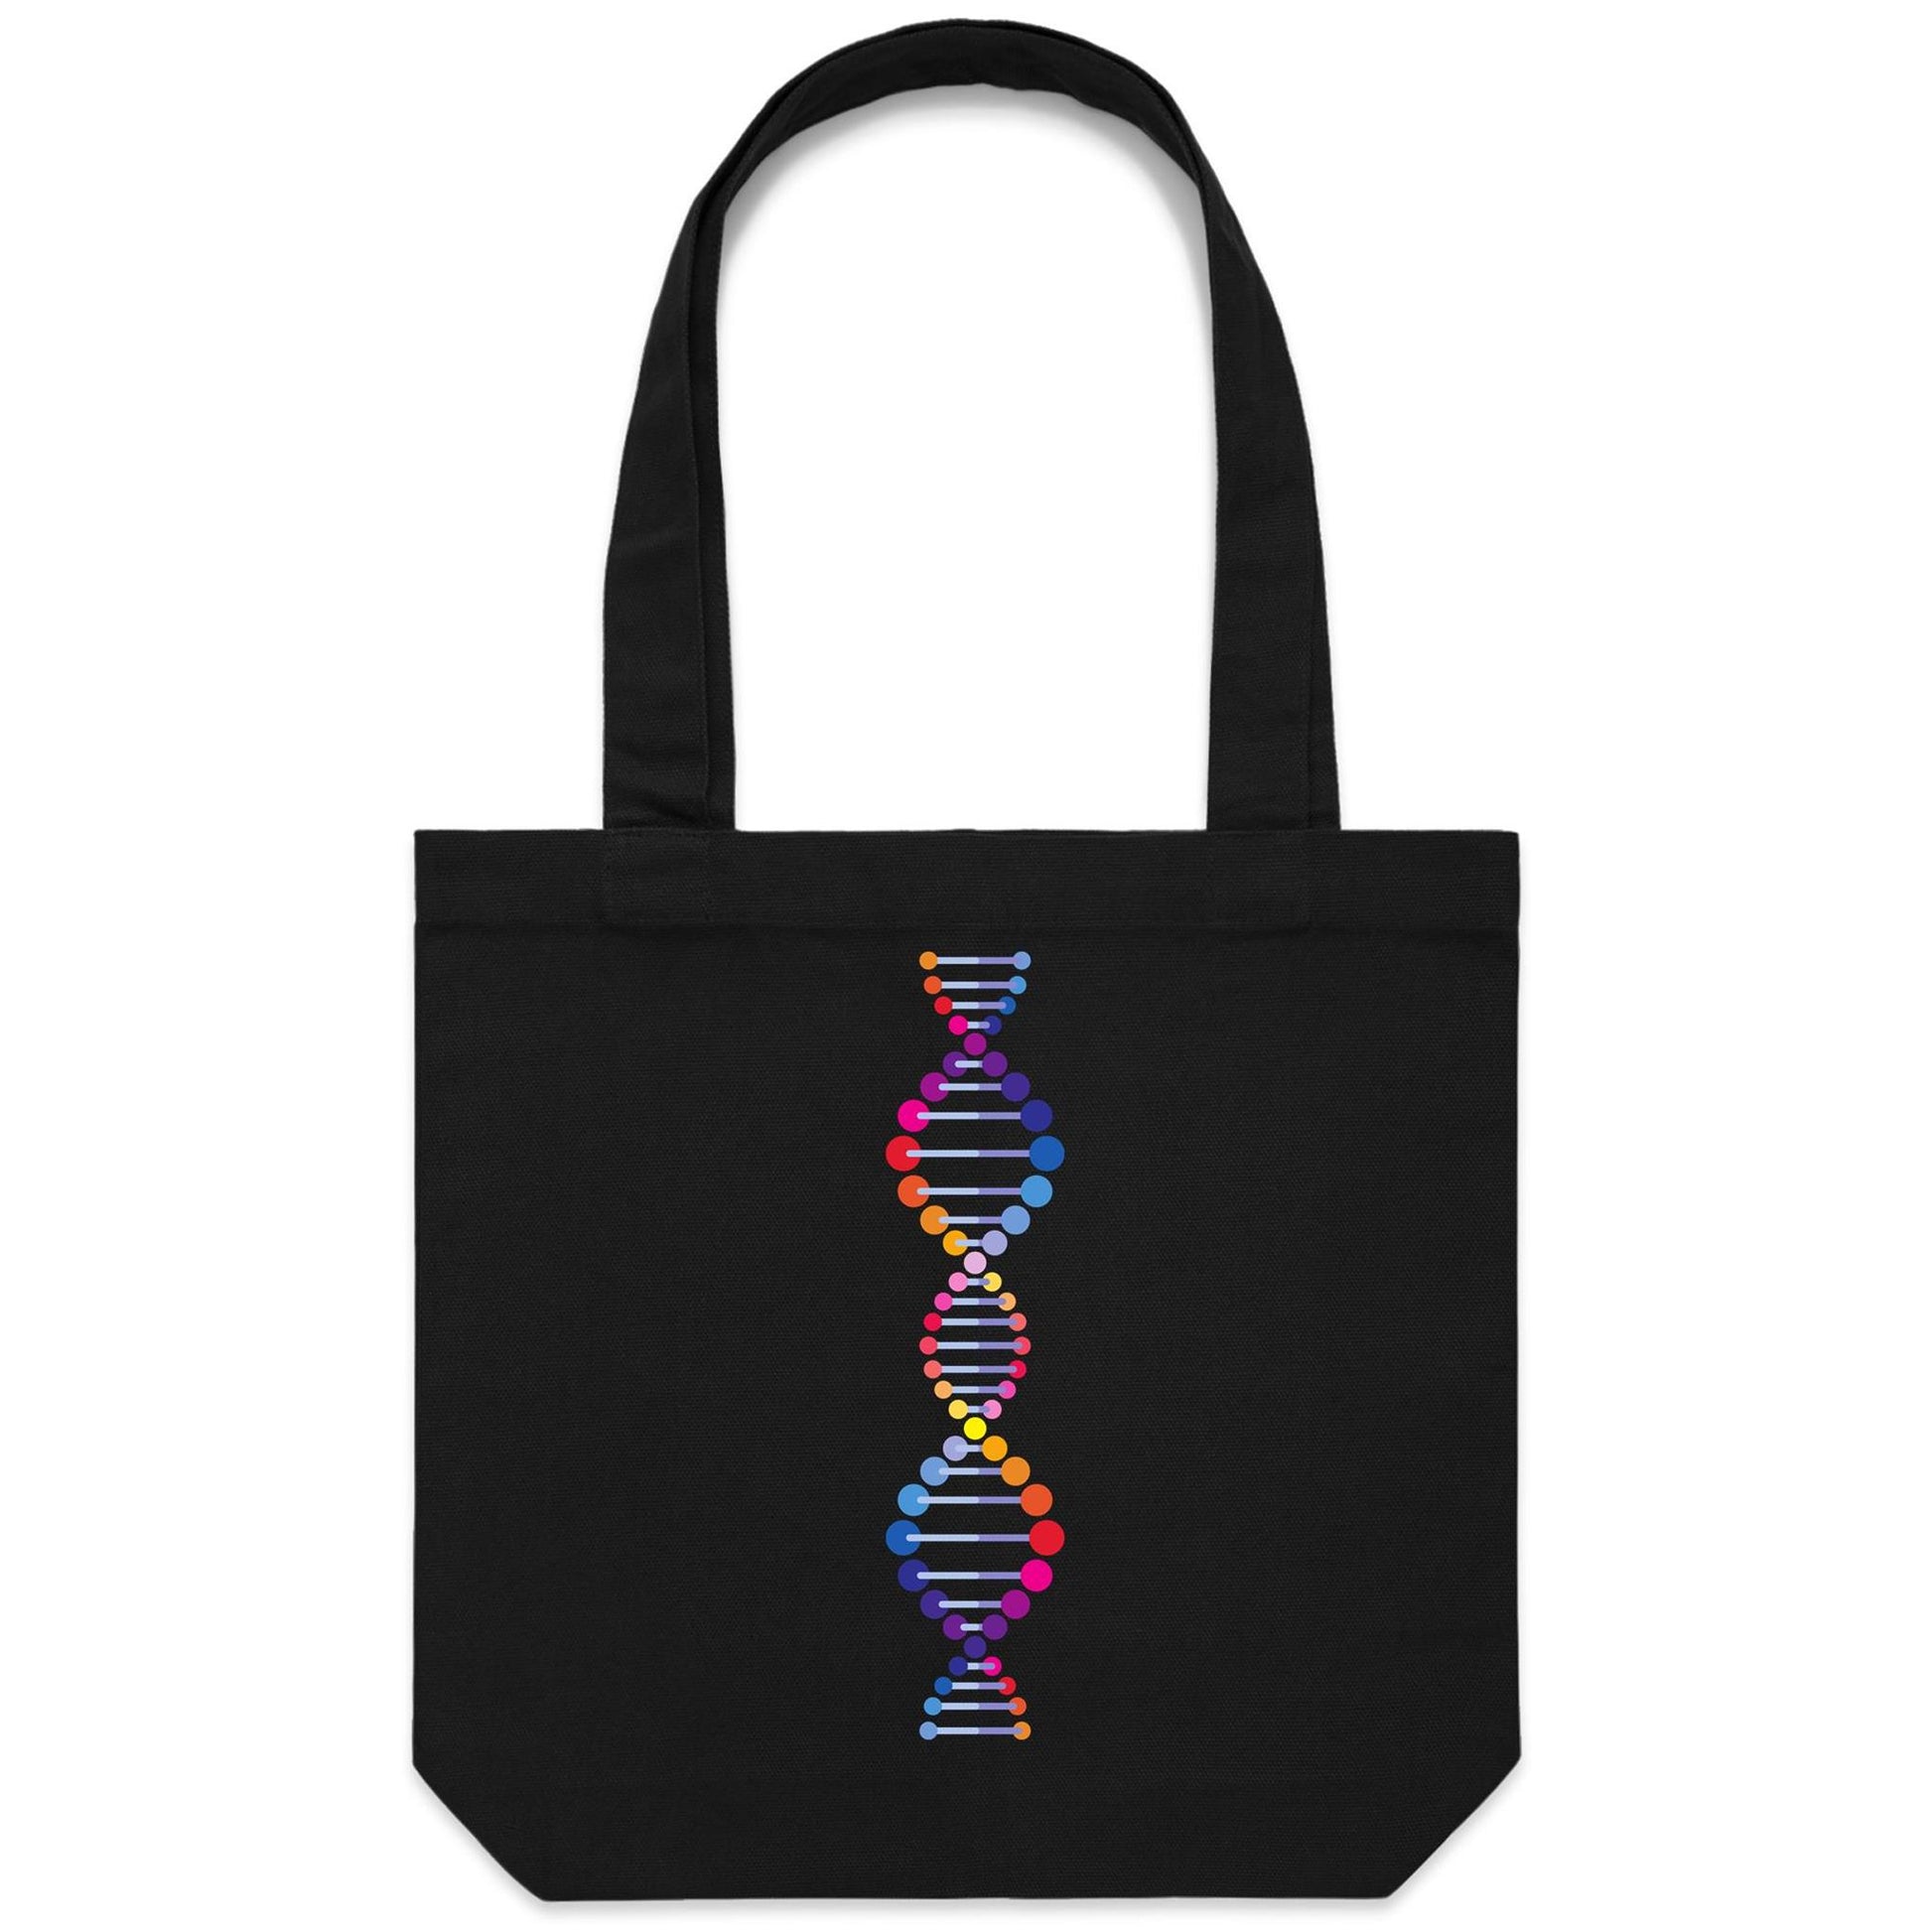 DNA - Canvas Tote Bag Black One-Size Tote Bag Science